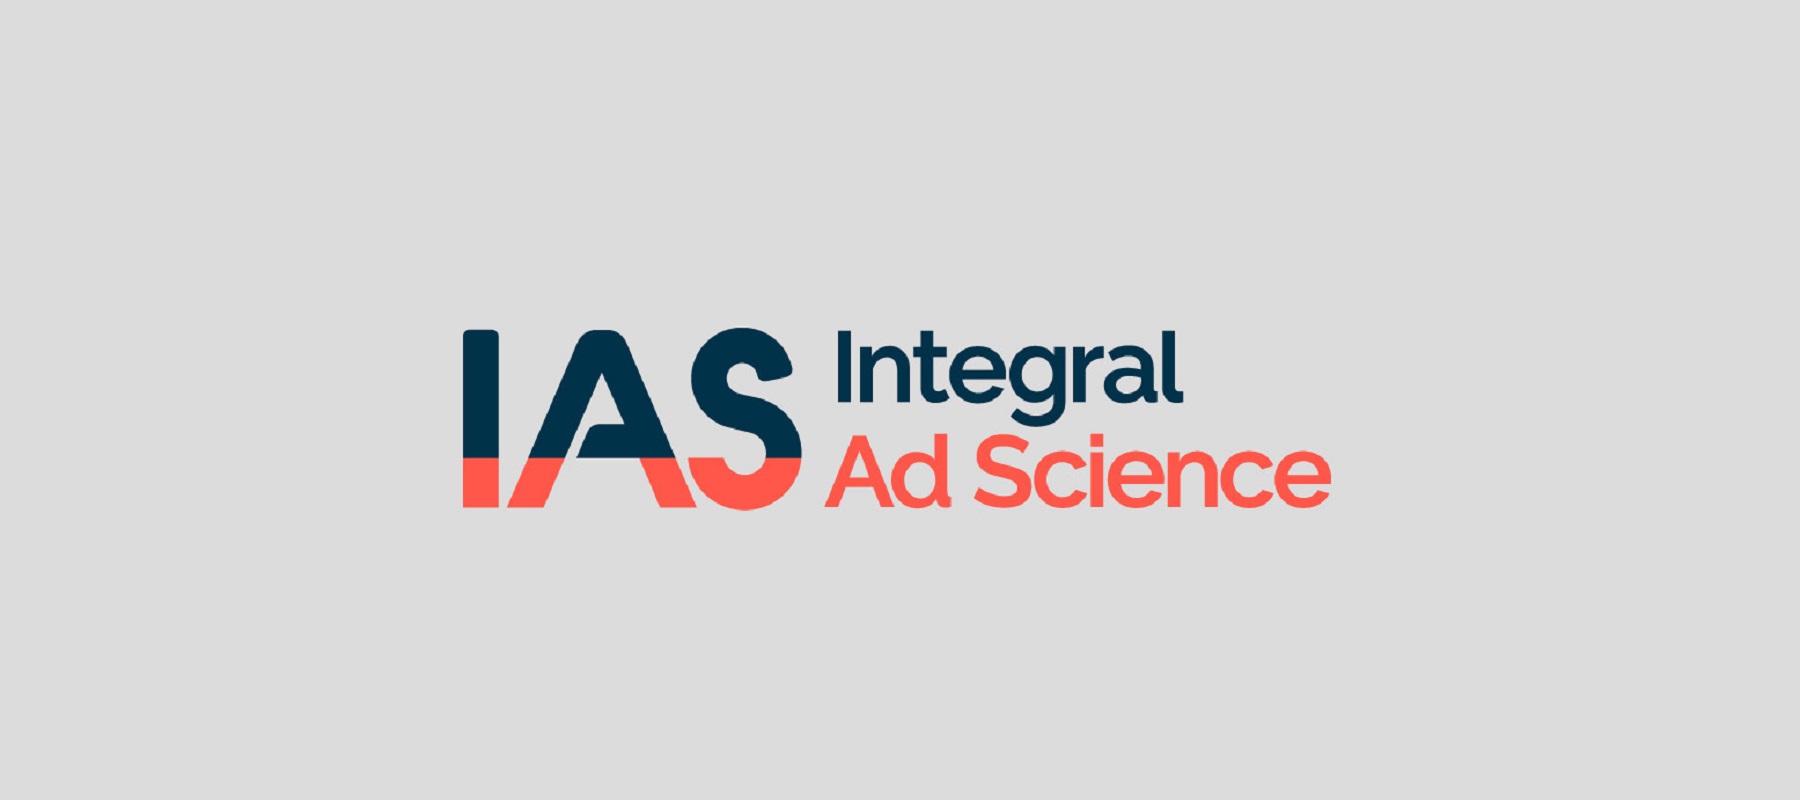 Integral Ad Science expands total media quality product to YouTube Shorts